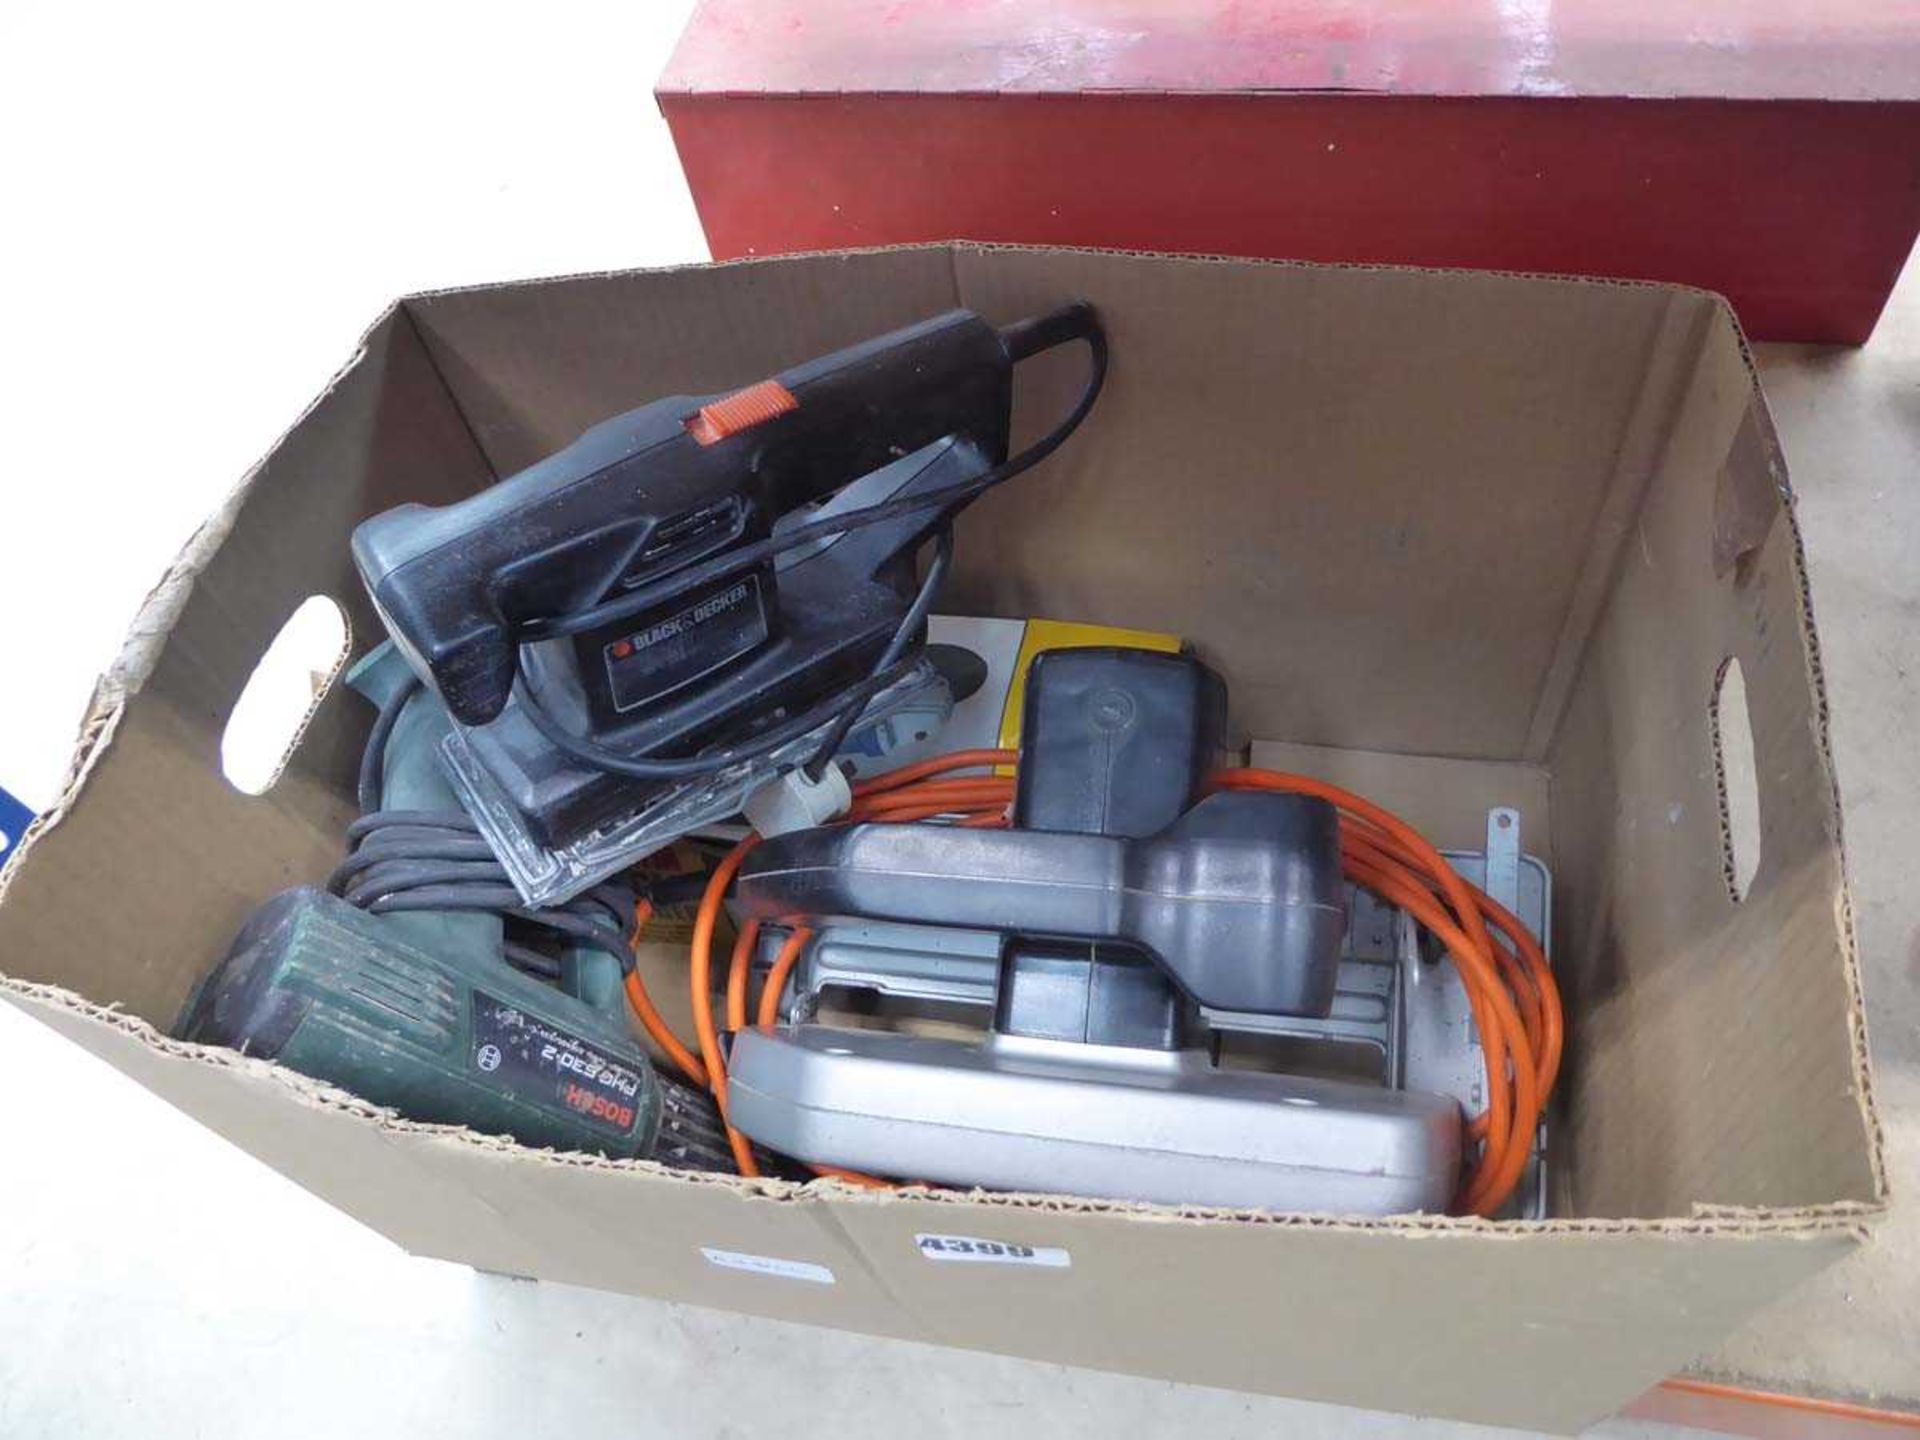 Box containing hot air paint striper, sander, circular saw and angle grinder